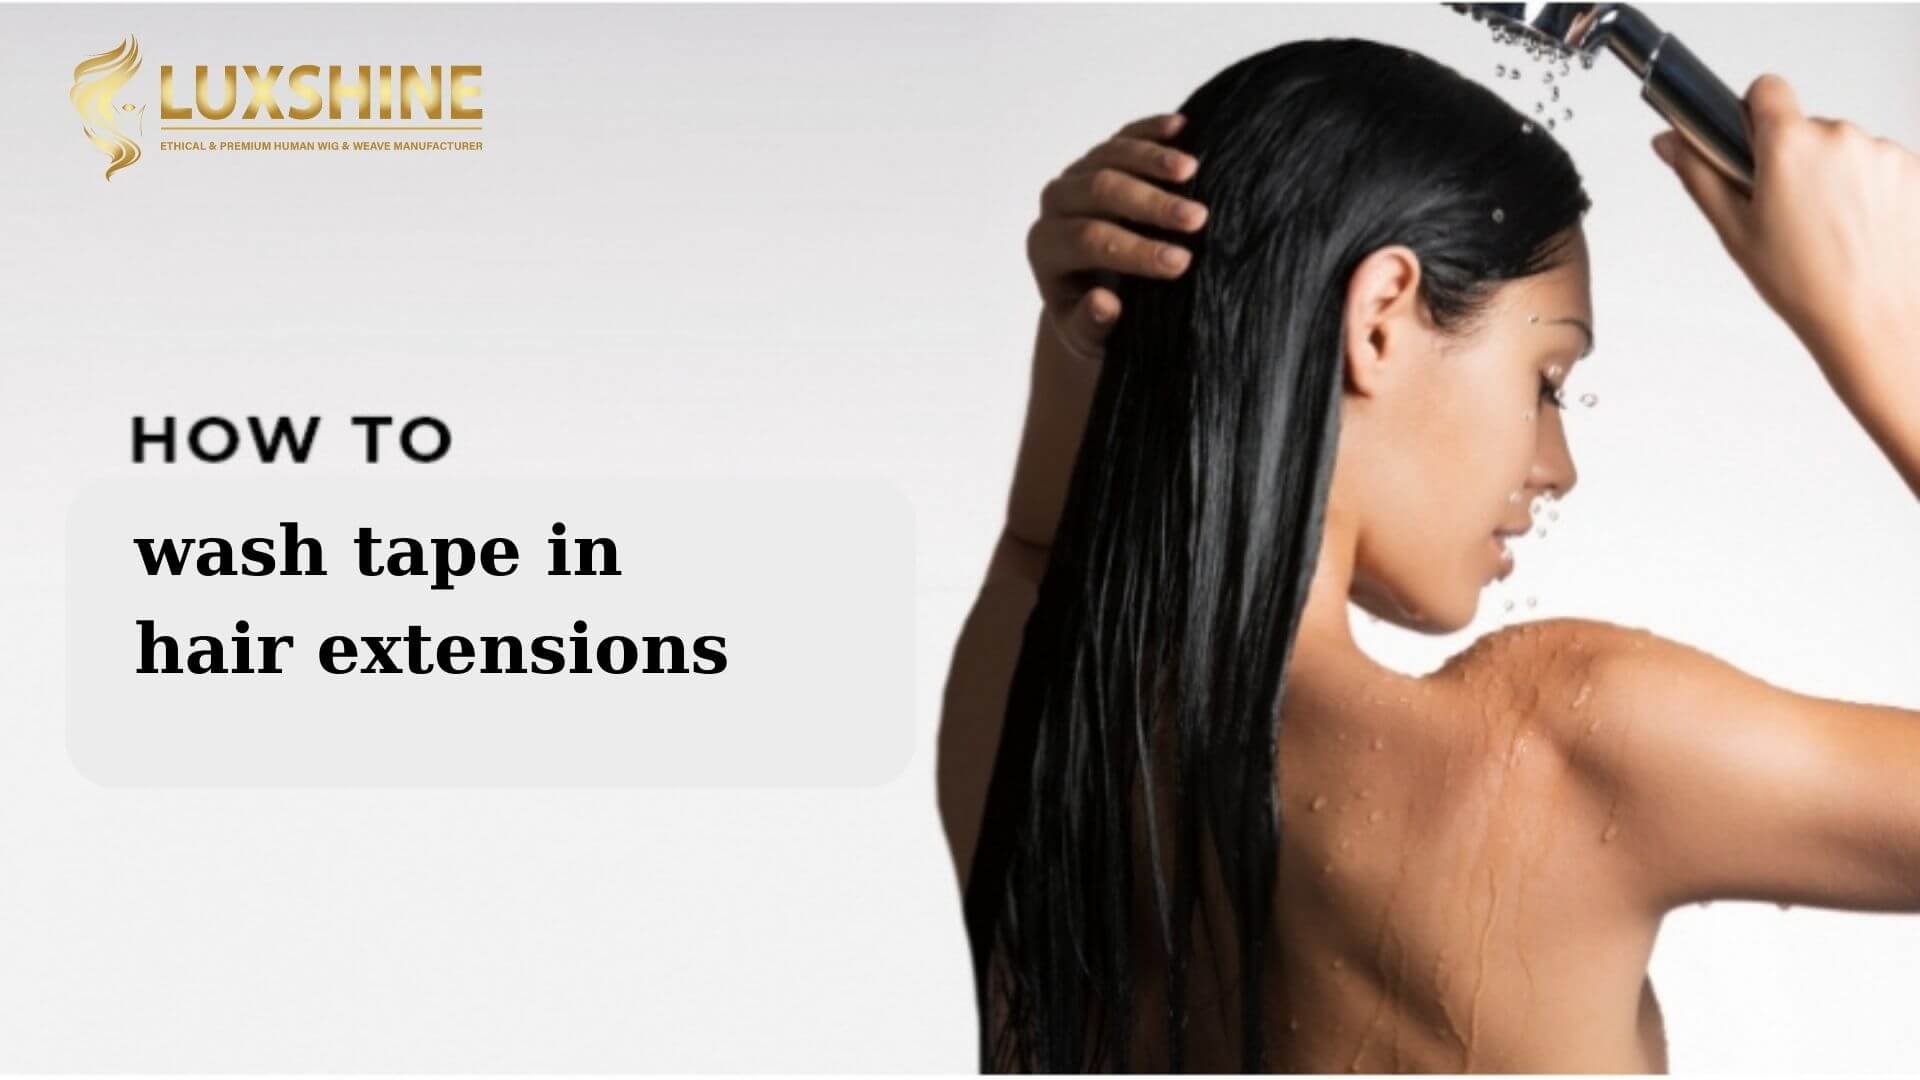 How to wash tape in hair extensions